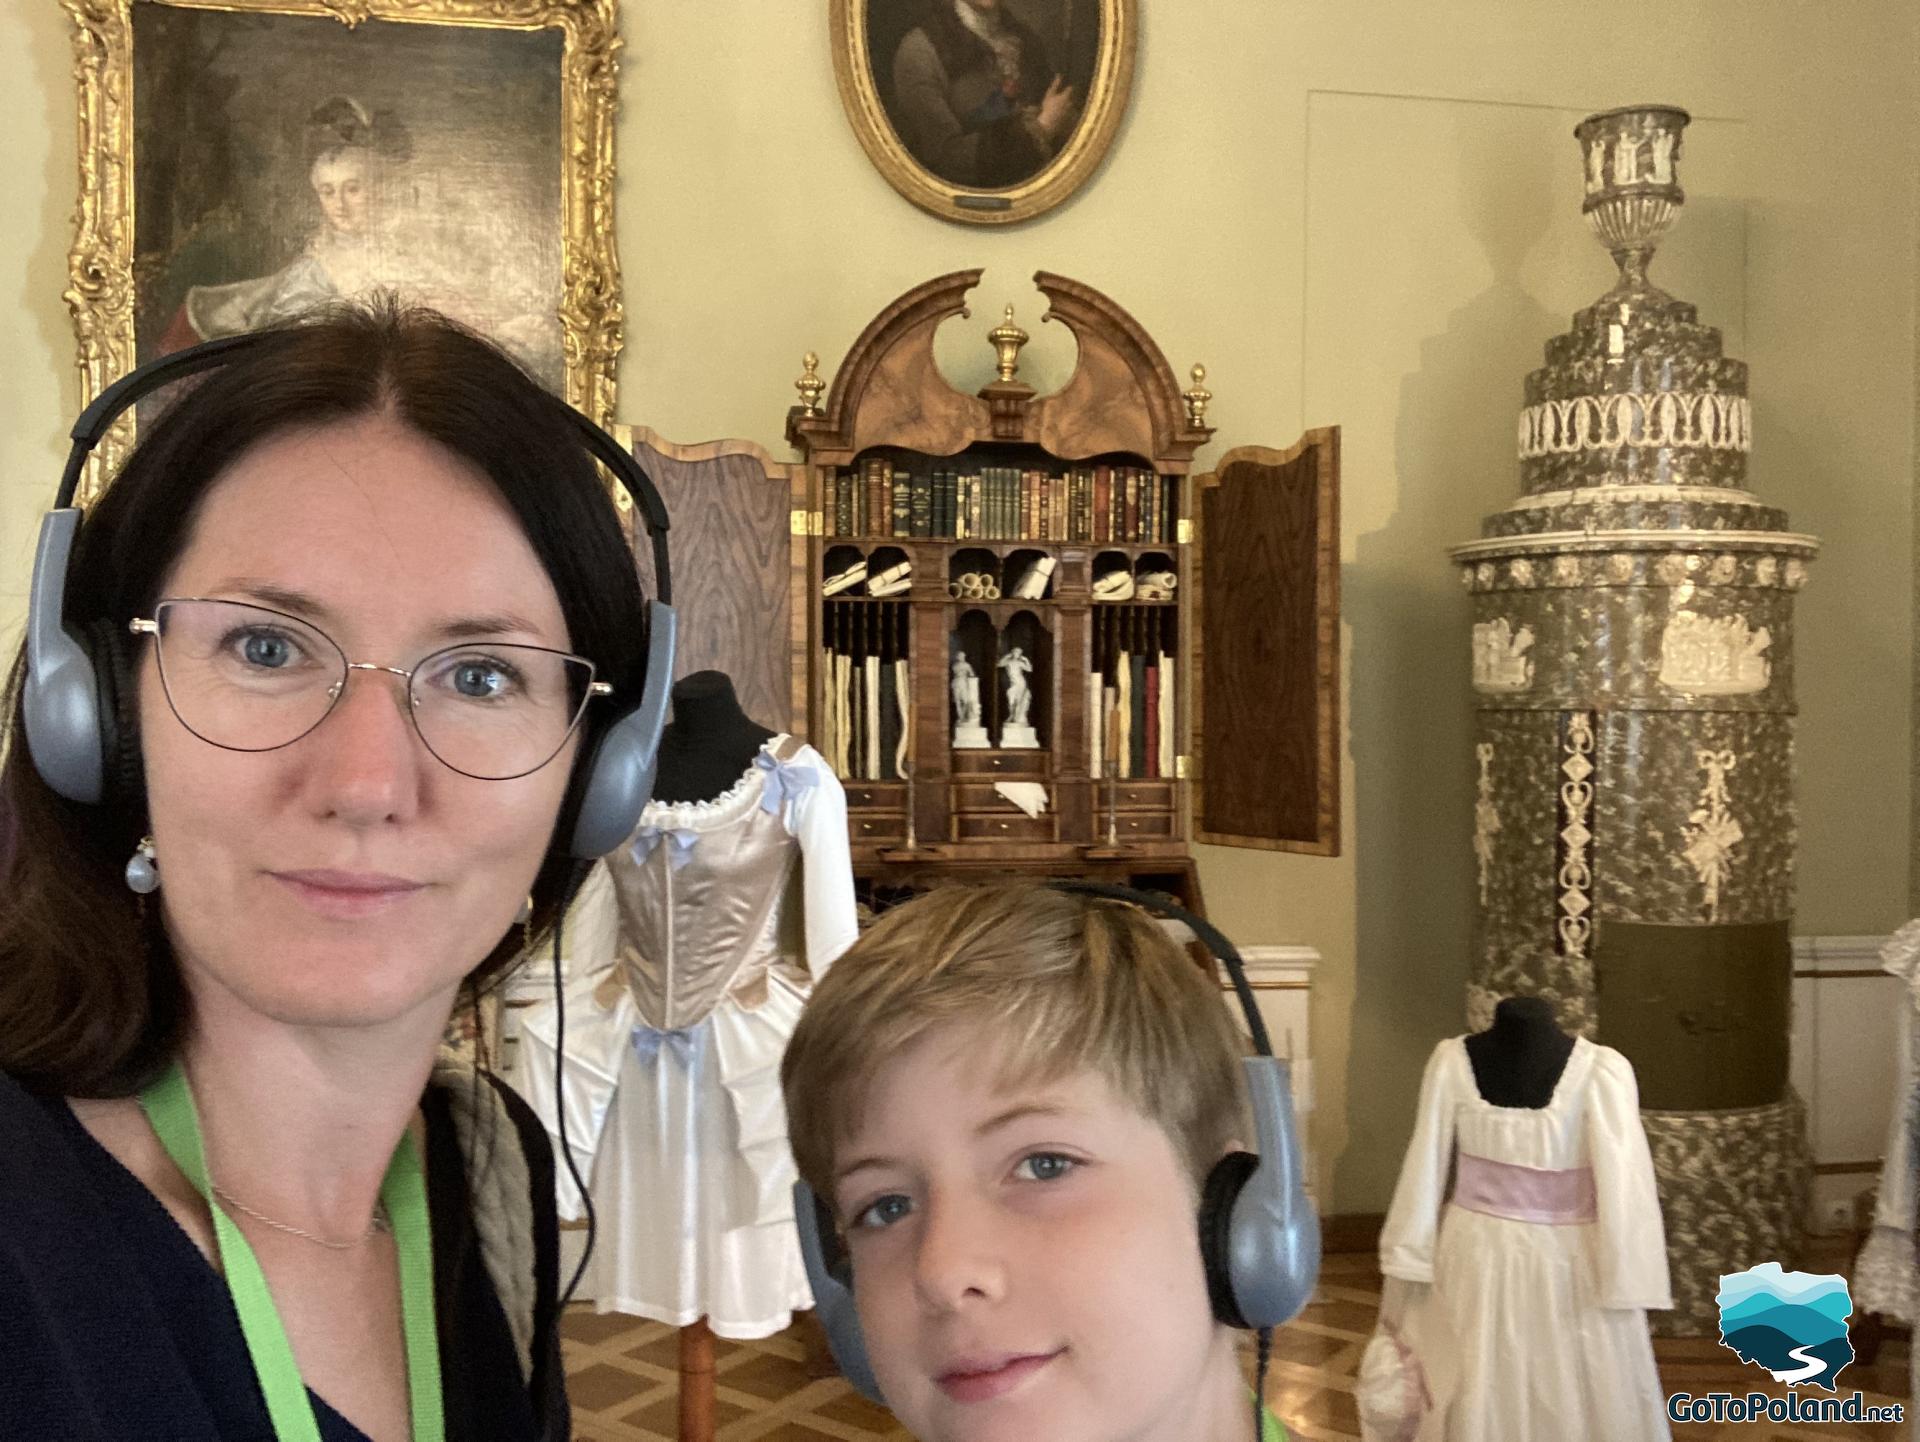 a woman and a boy are taking selfie, behind them there are decorative elements of palace like small bookcase and a painting of woman hangs on the wall